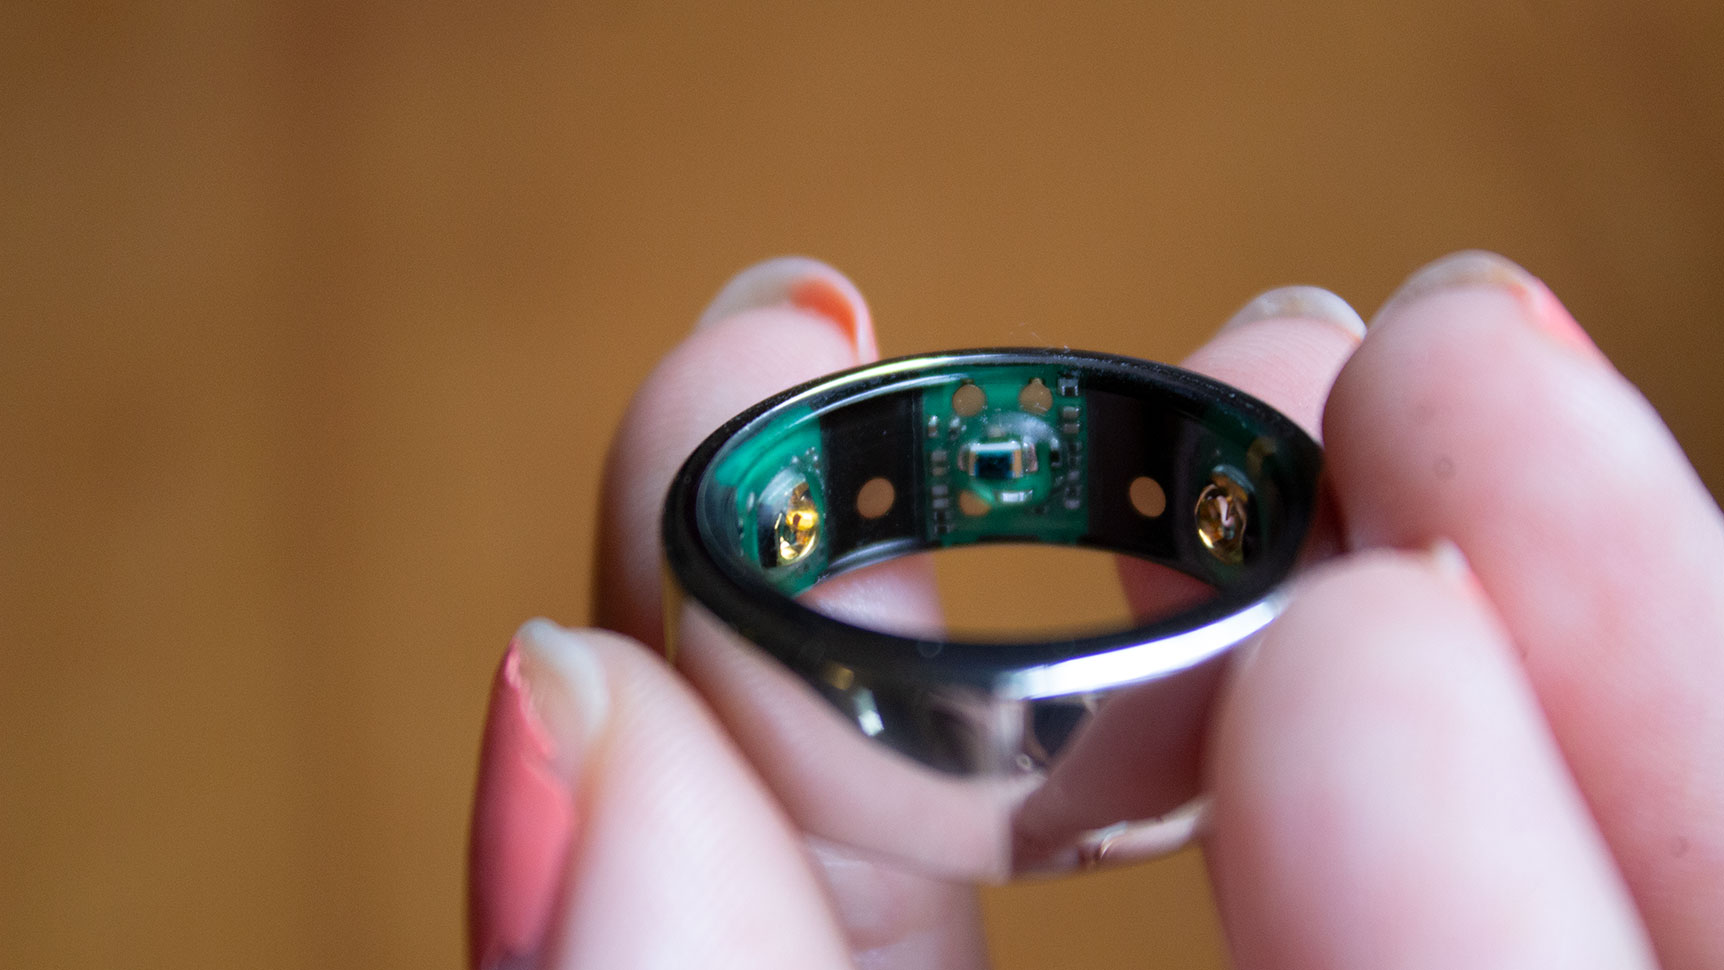 Oura Ring Review 2020: Is It Worth It?